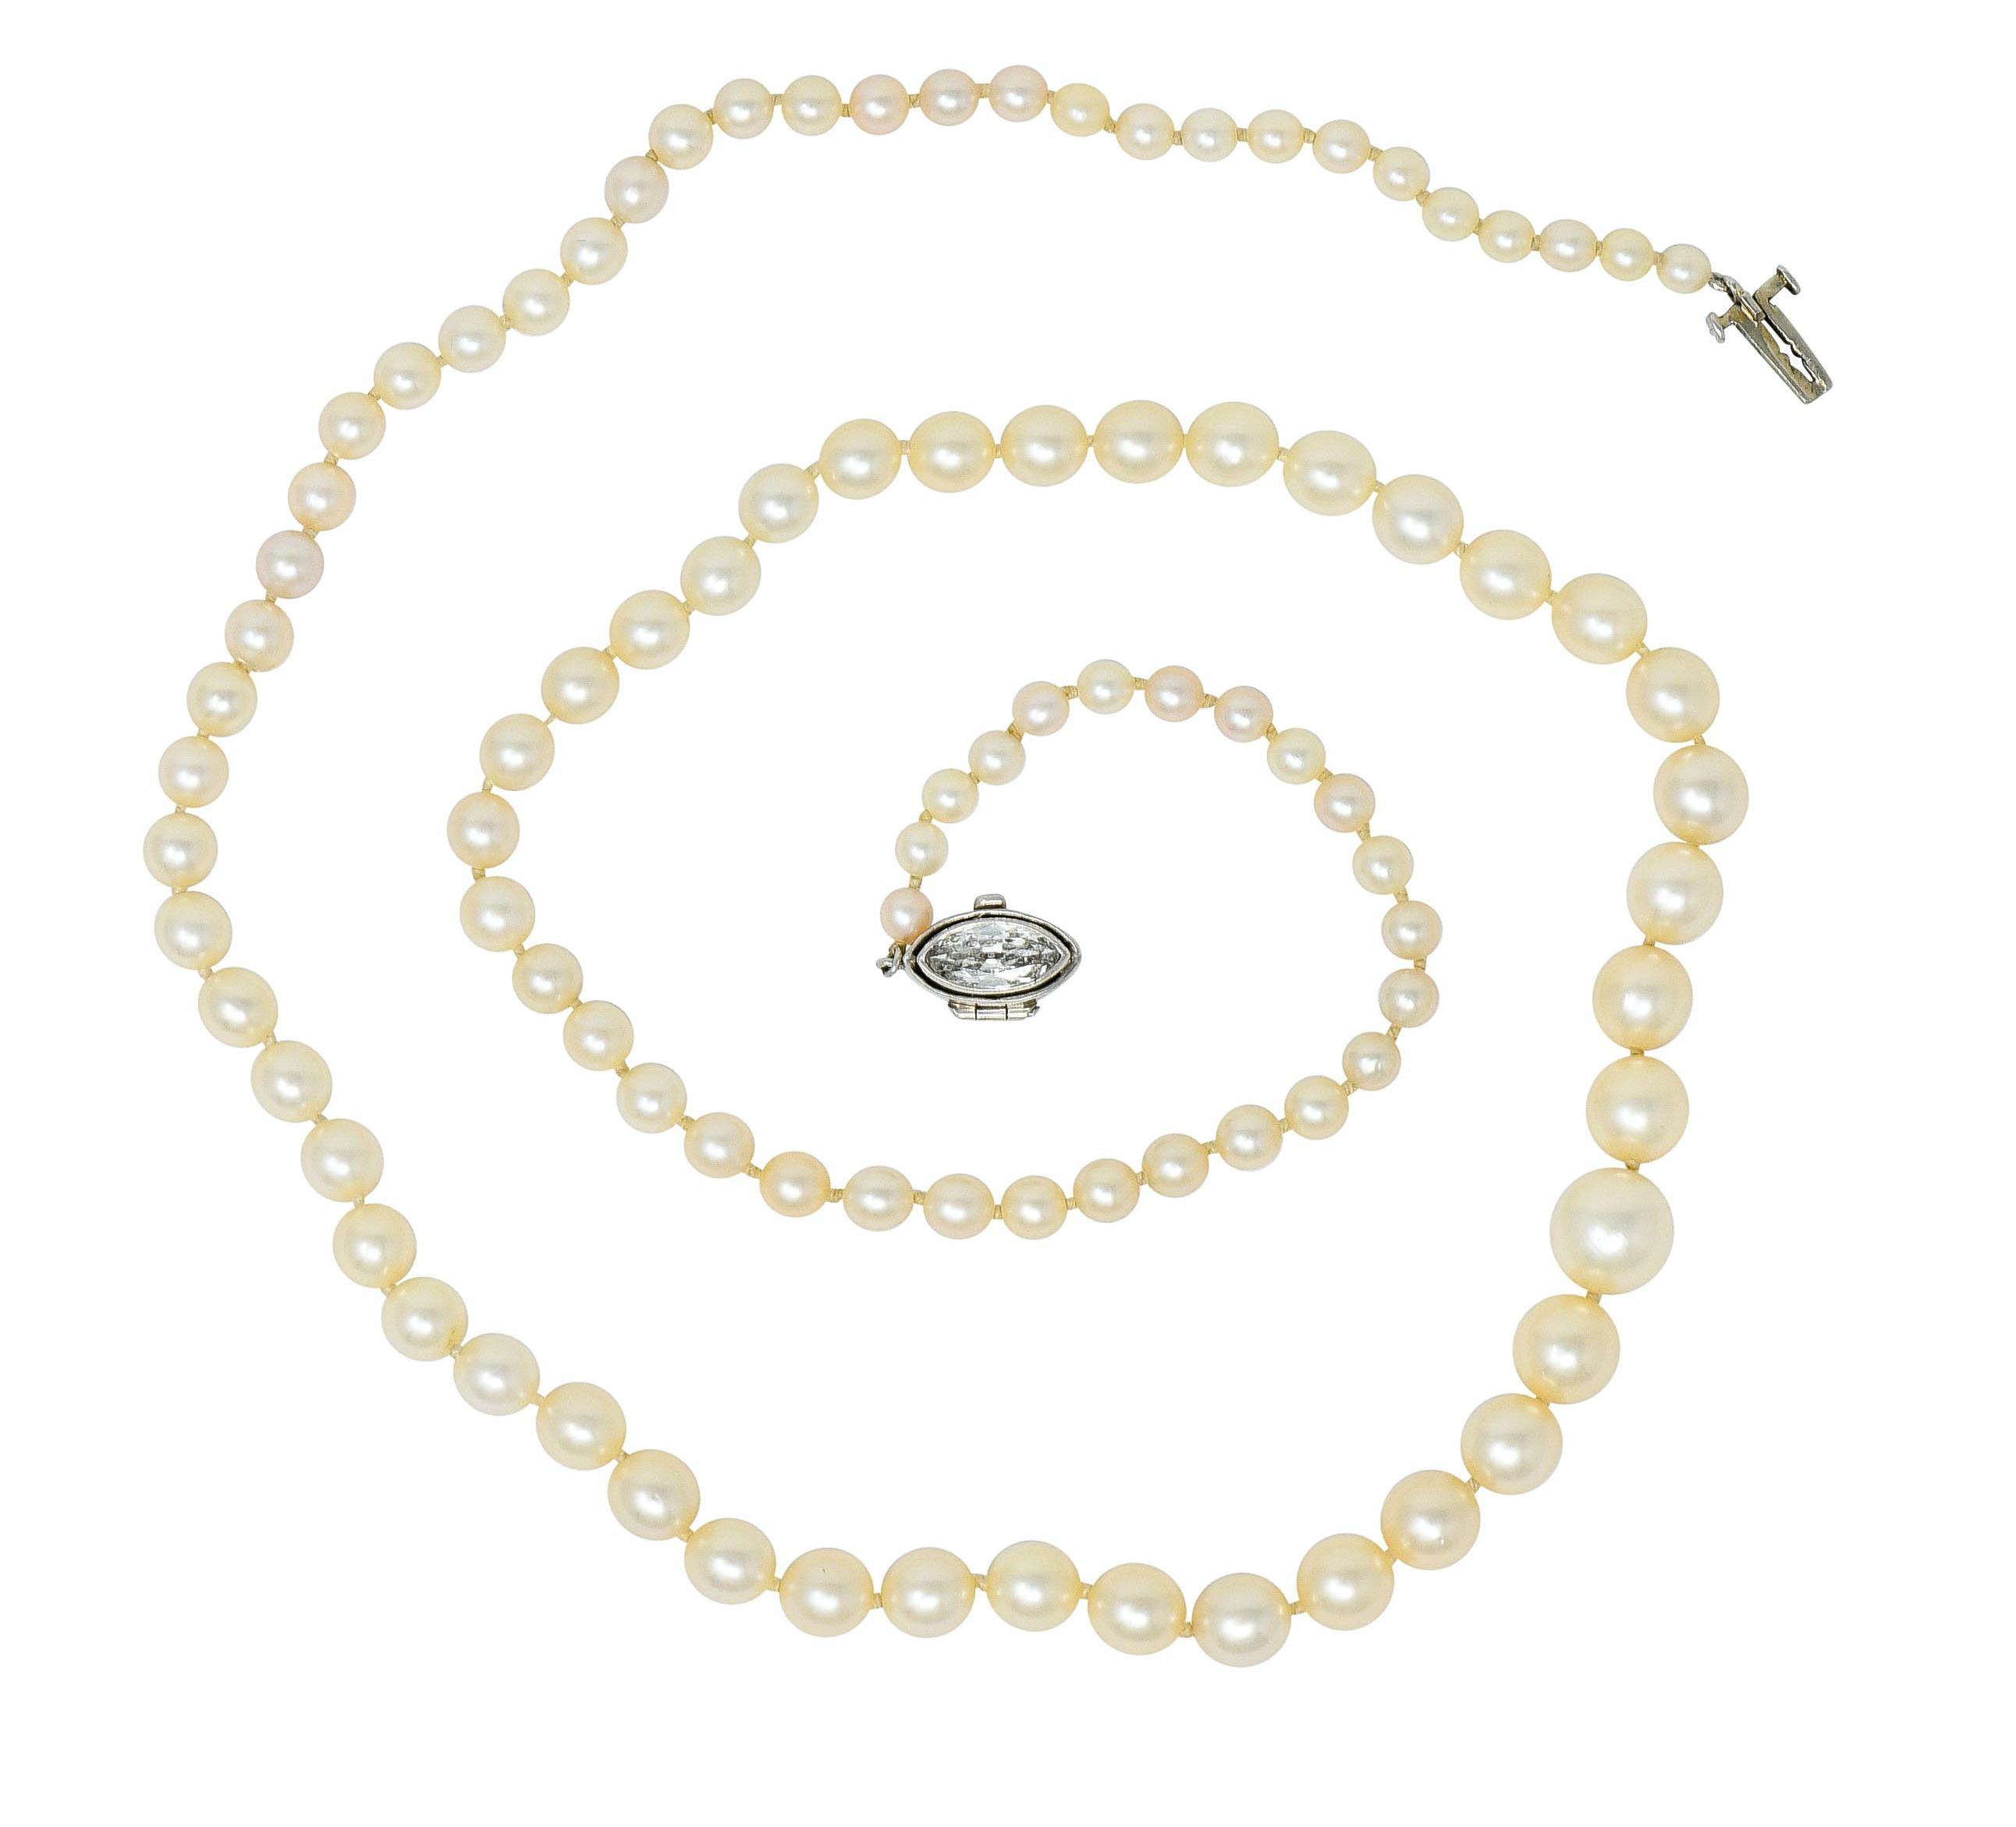 Strand necklace is hand knotted with round cultured pearls that measure 3.2 mm to 7.3 mm, graduating in size

Very well-matched with cream body color and very good luster

Clasp is bezel set with a marquise cut diamond weighing approximately 0.47